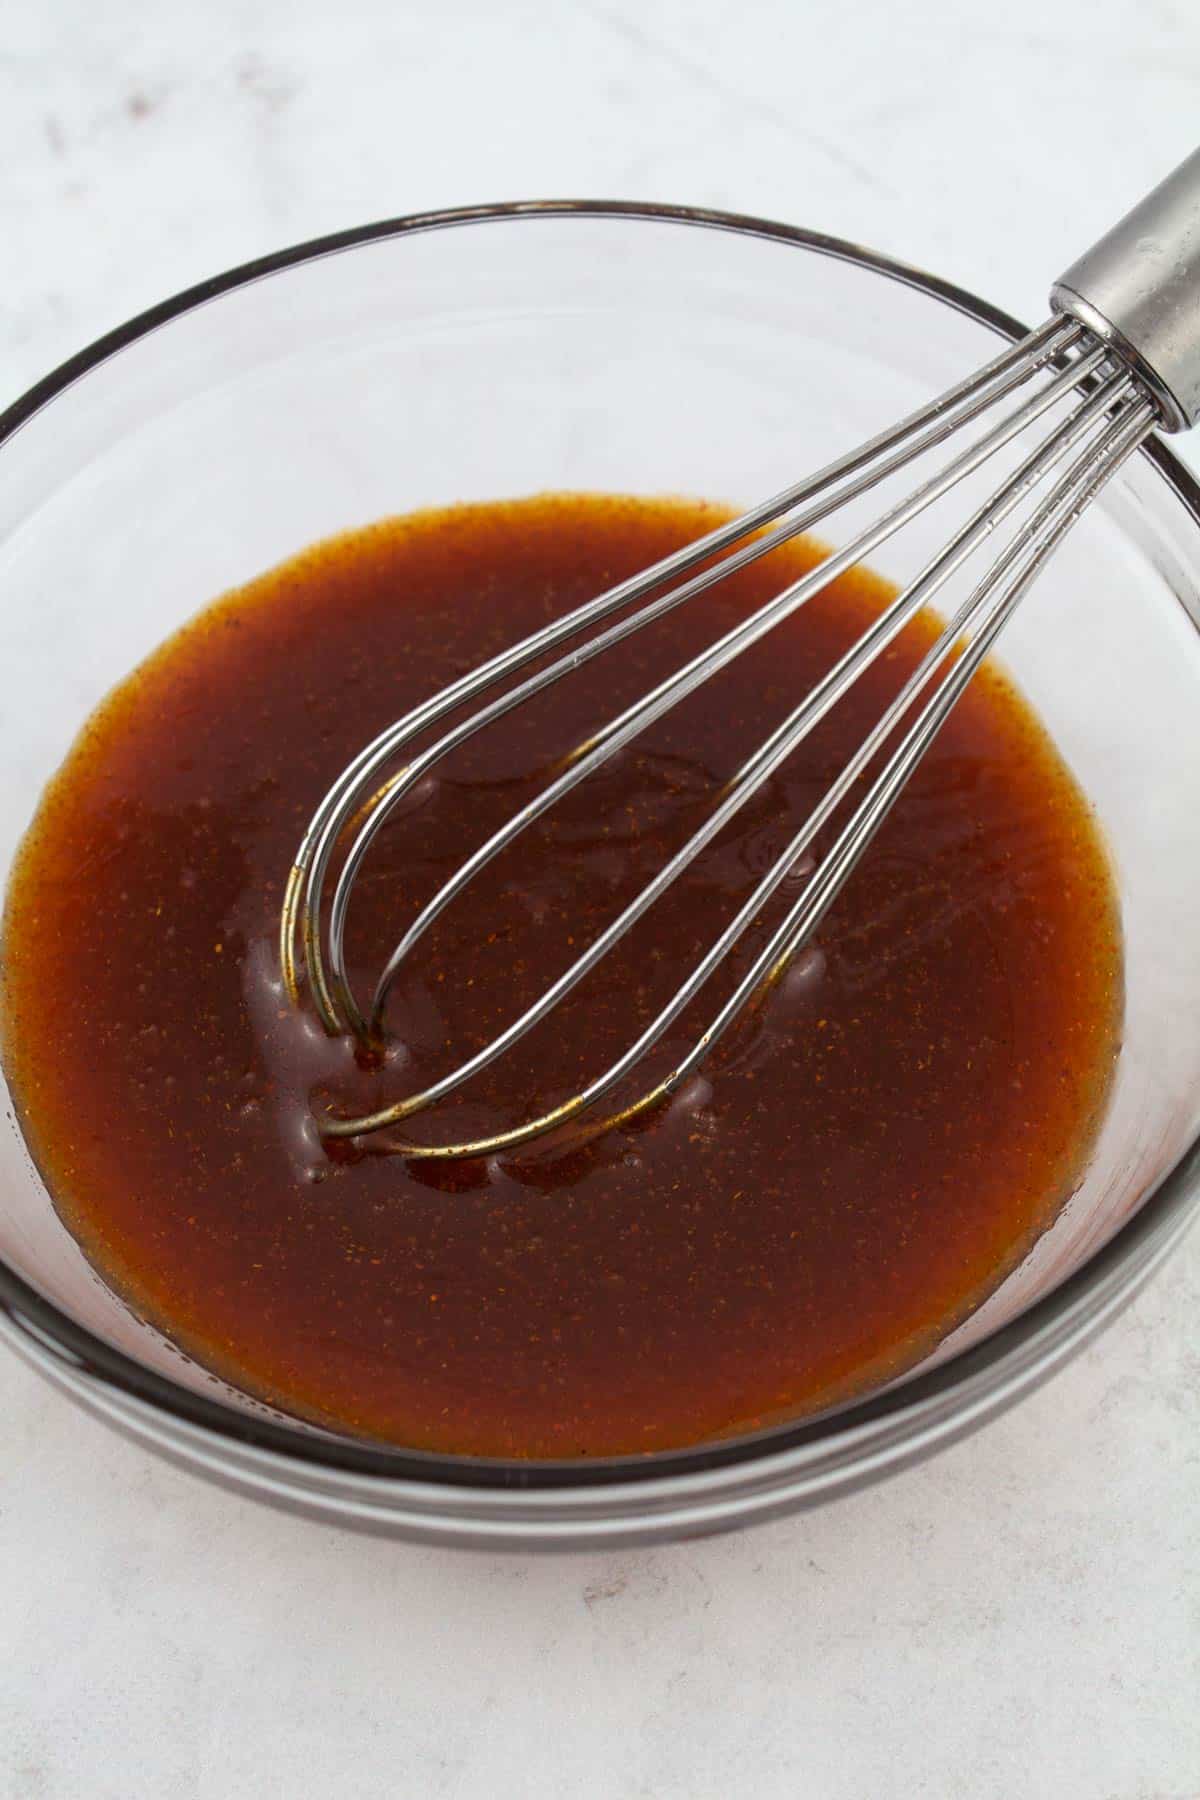 Hot honey sauce mixed in a glass bowl with a whisk.